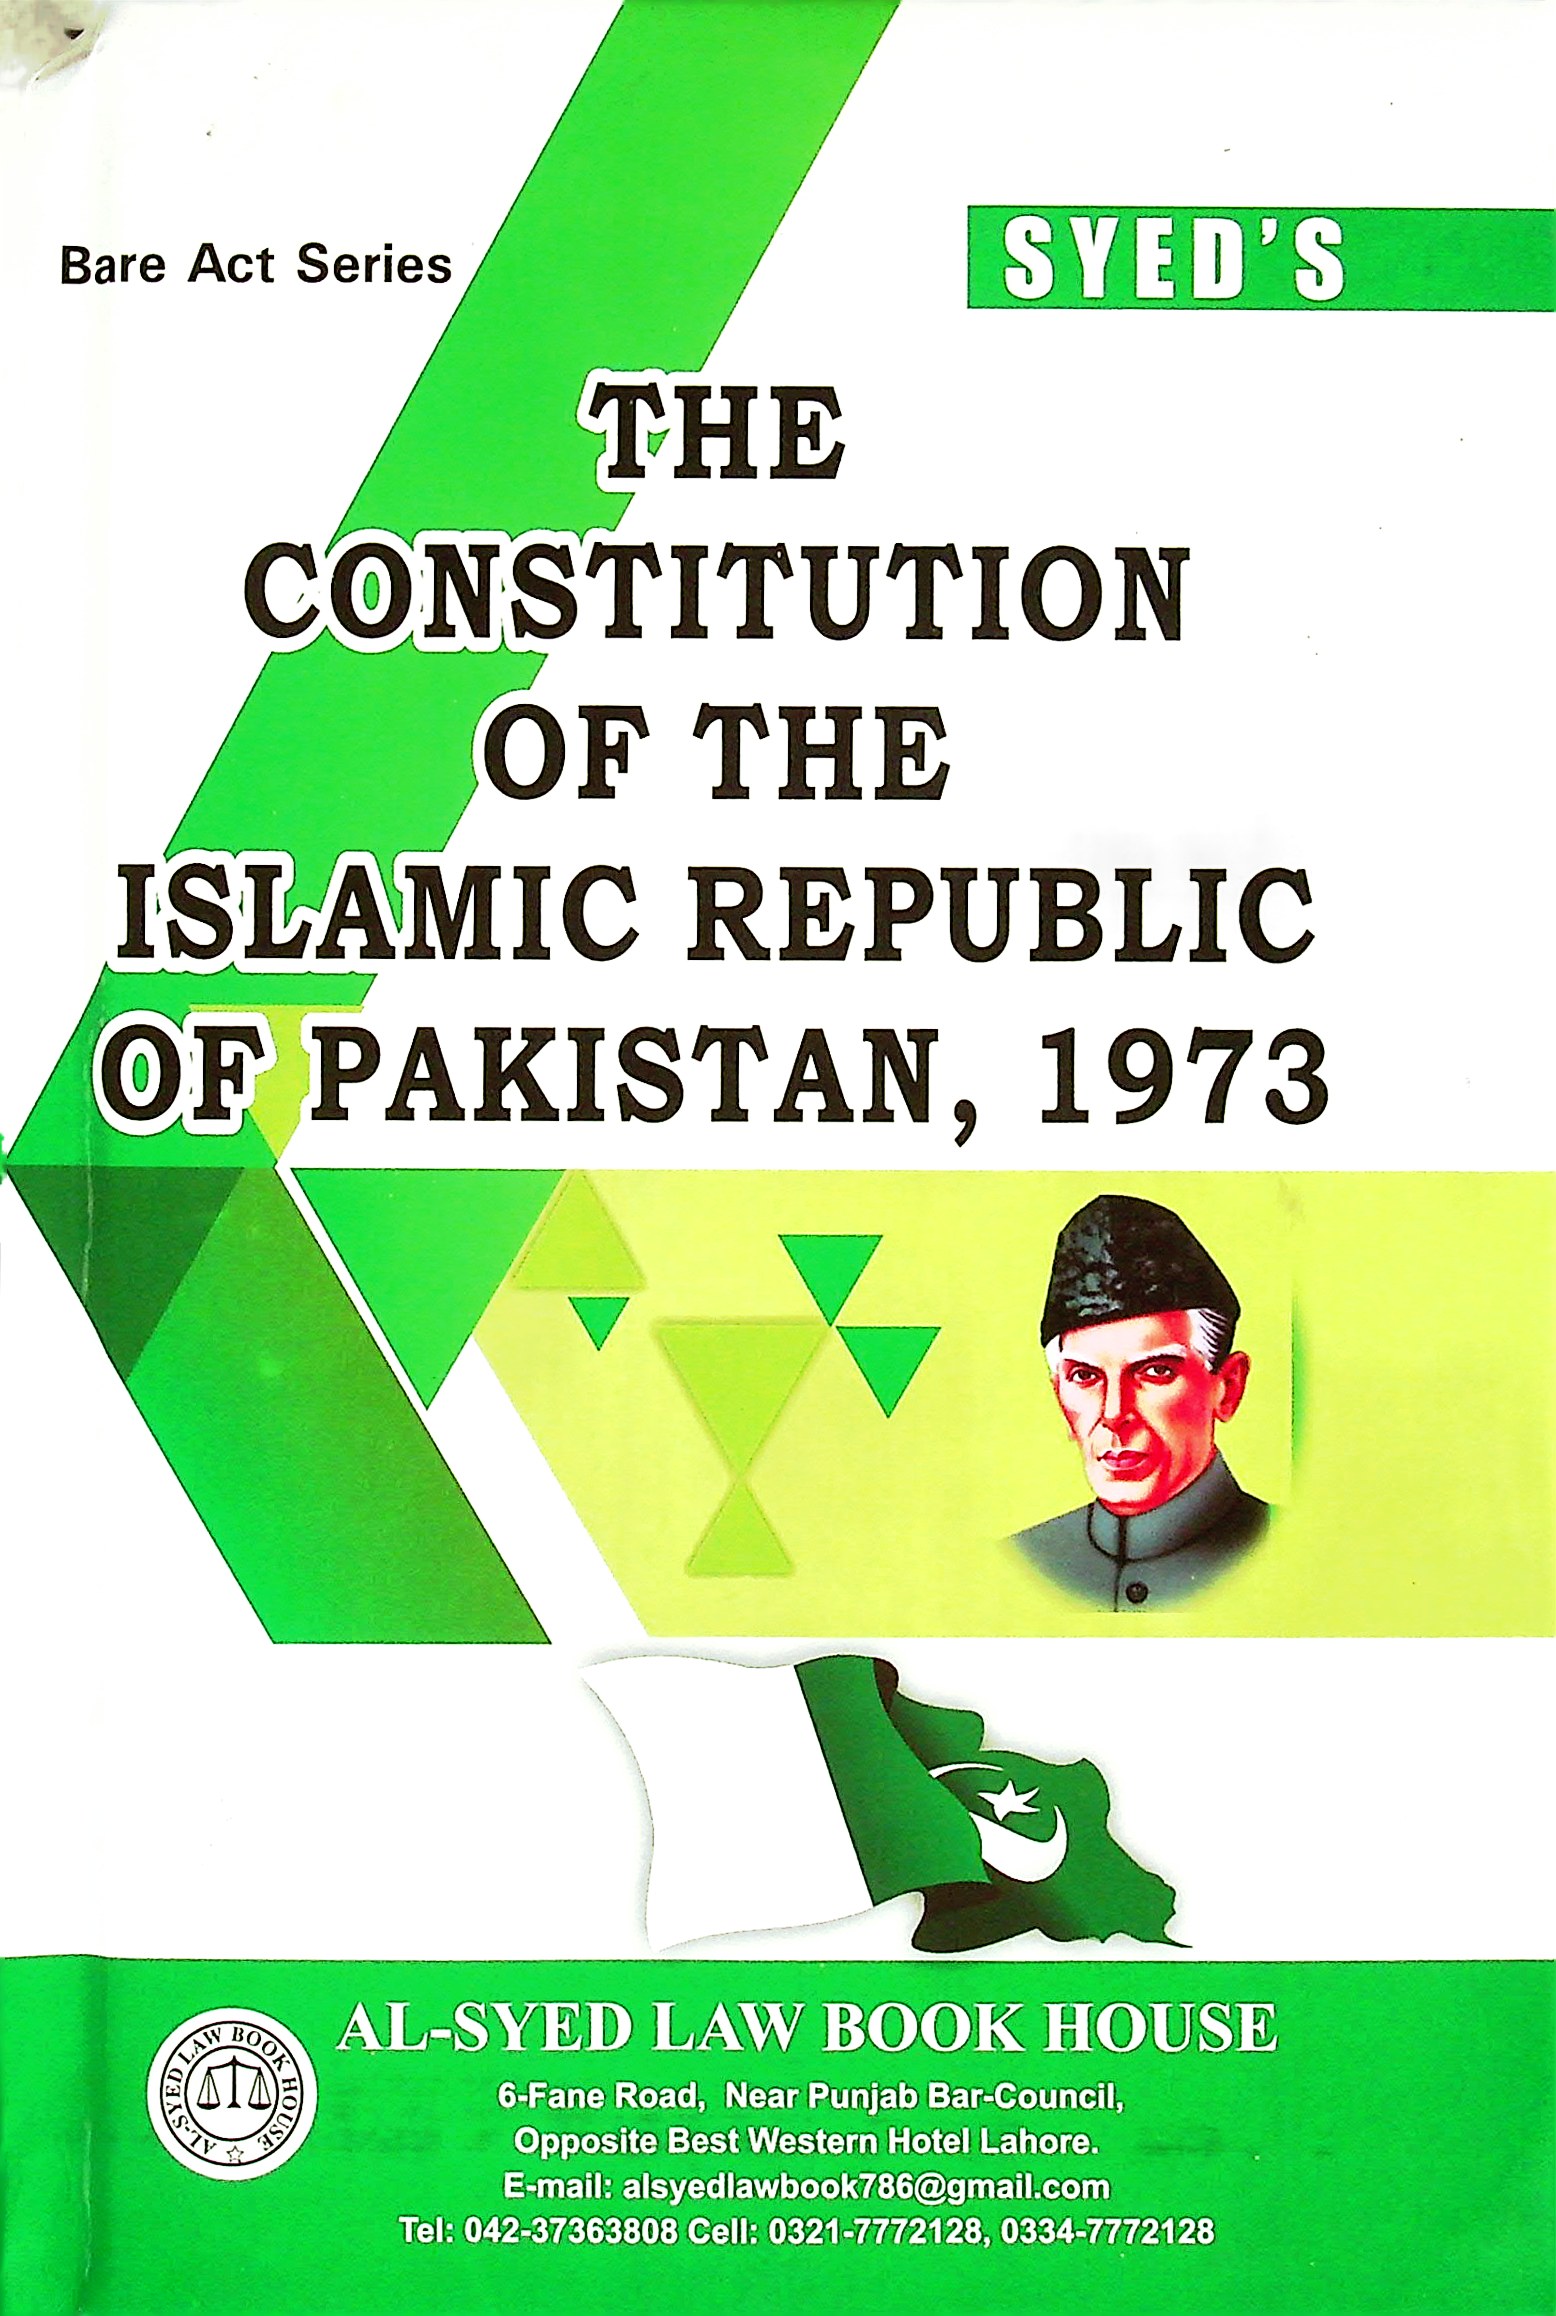 The constitution of the Islamic republic of Pakistan, 1973